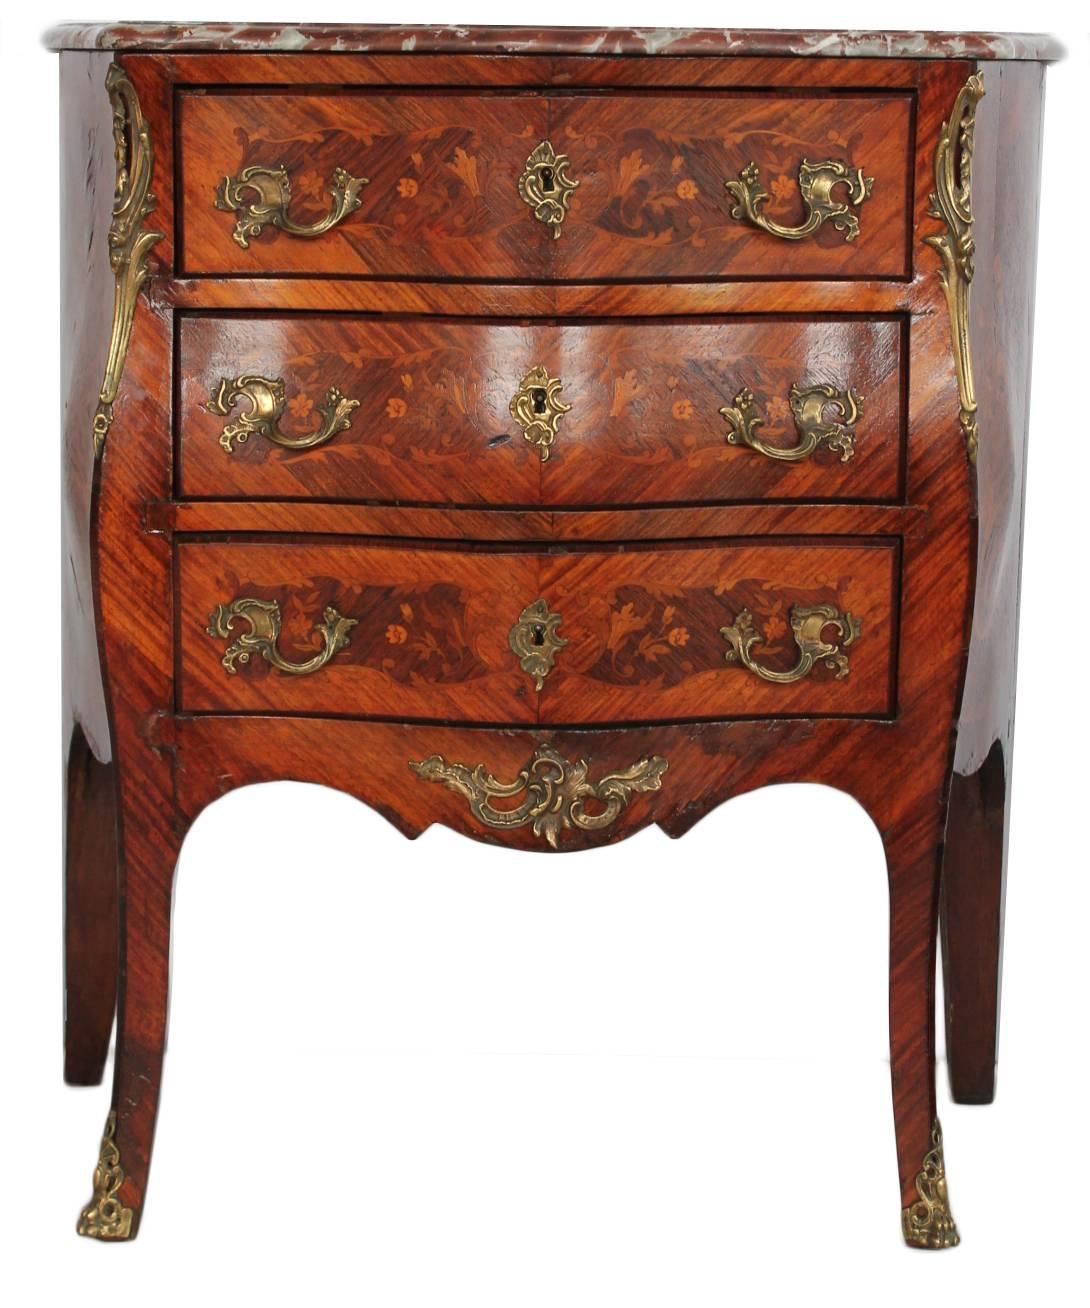 With serpentine rouge marble top over a conforming case, with three floral and foliate inlaid long drawers and shaped frieze, raised on splayed legs ending in bronze sabots.